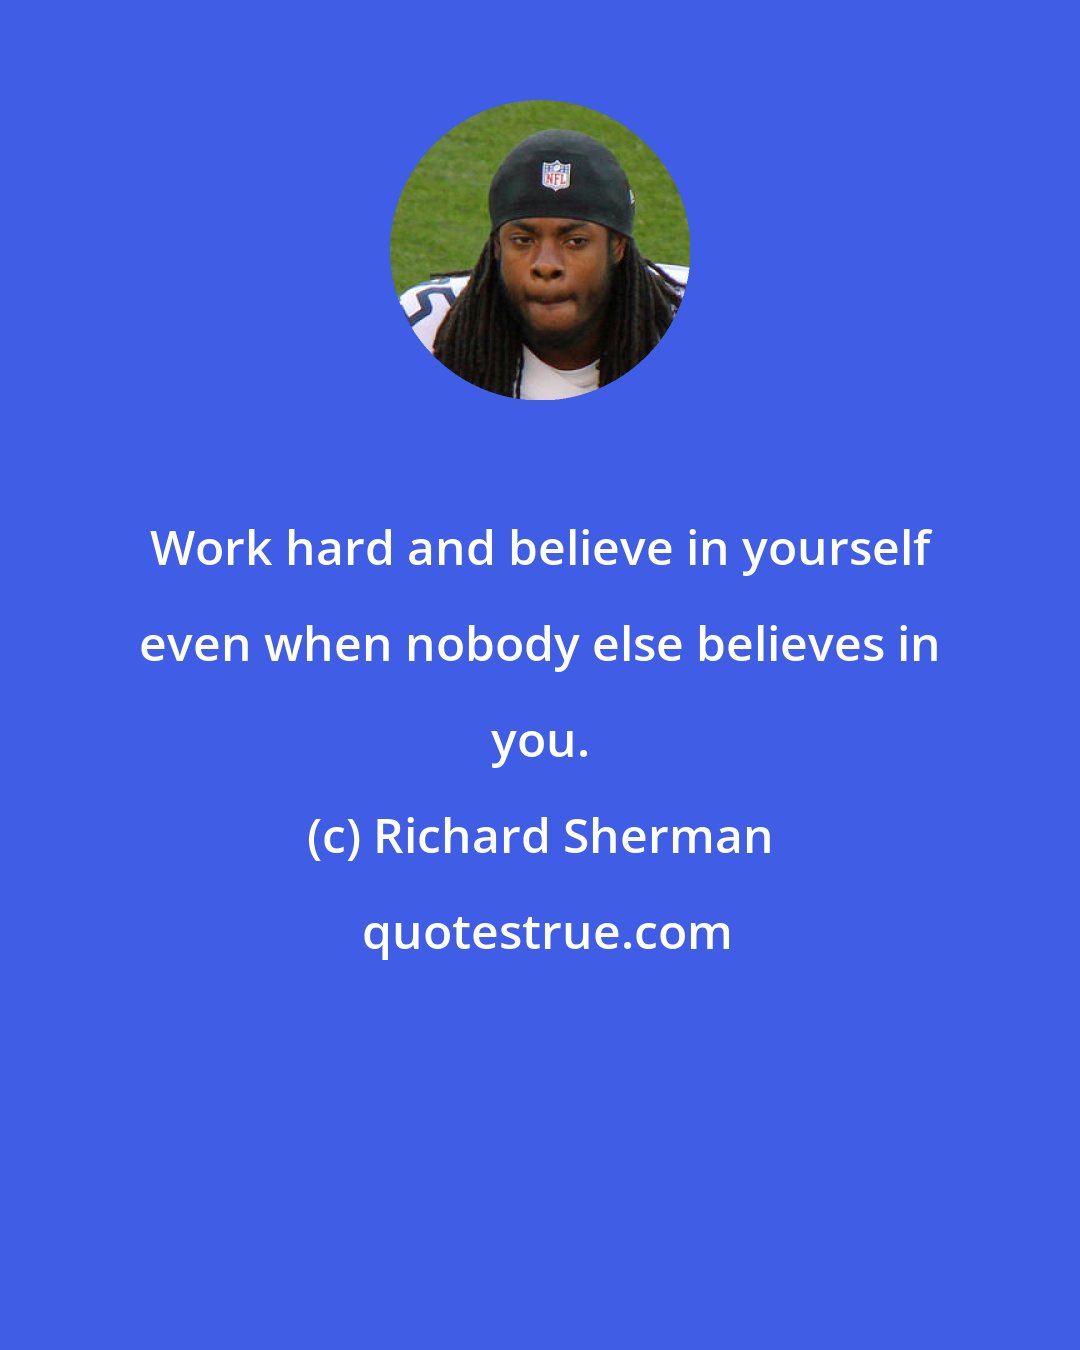 Richard Sherman: Work hard and believe in yourself even when nobody else believes in you.